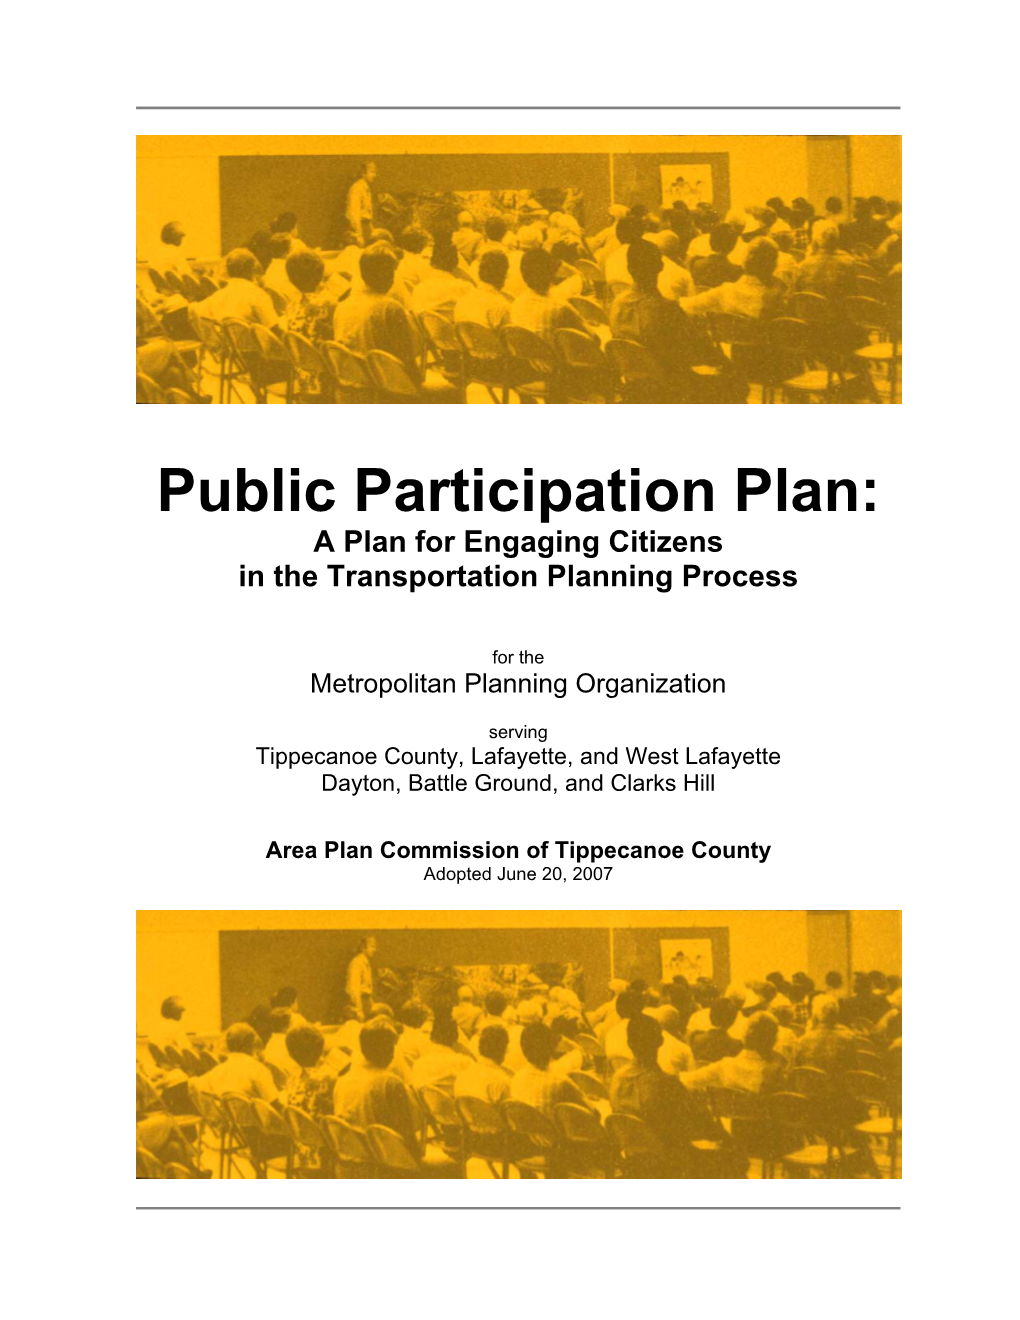 Public Participation Plan: a Plan for Engaging Citizens in the Transportation Planning Process